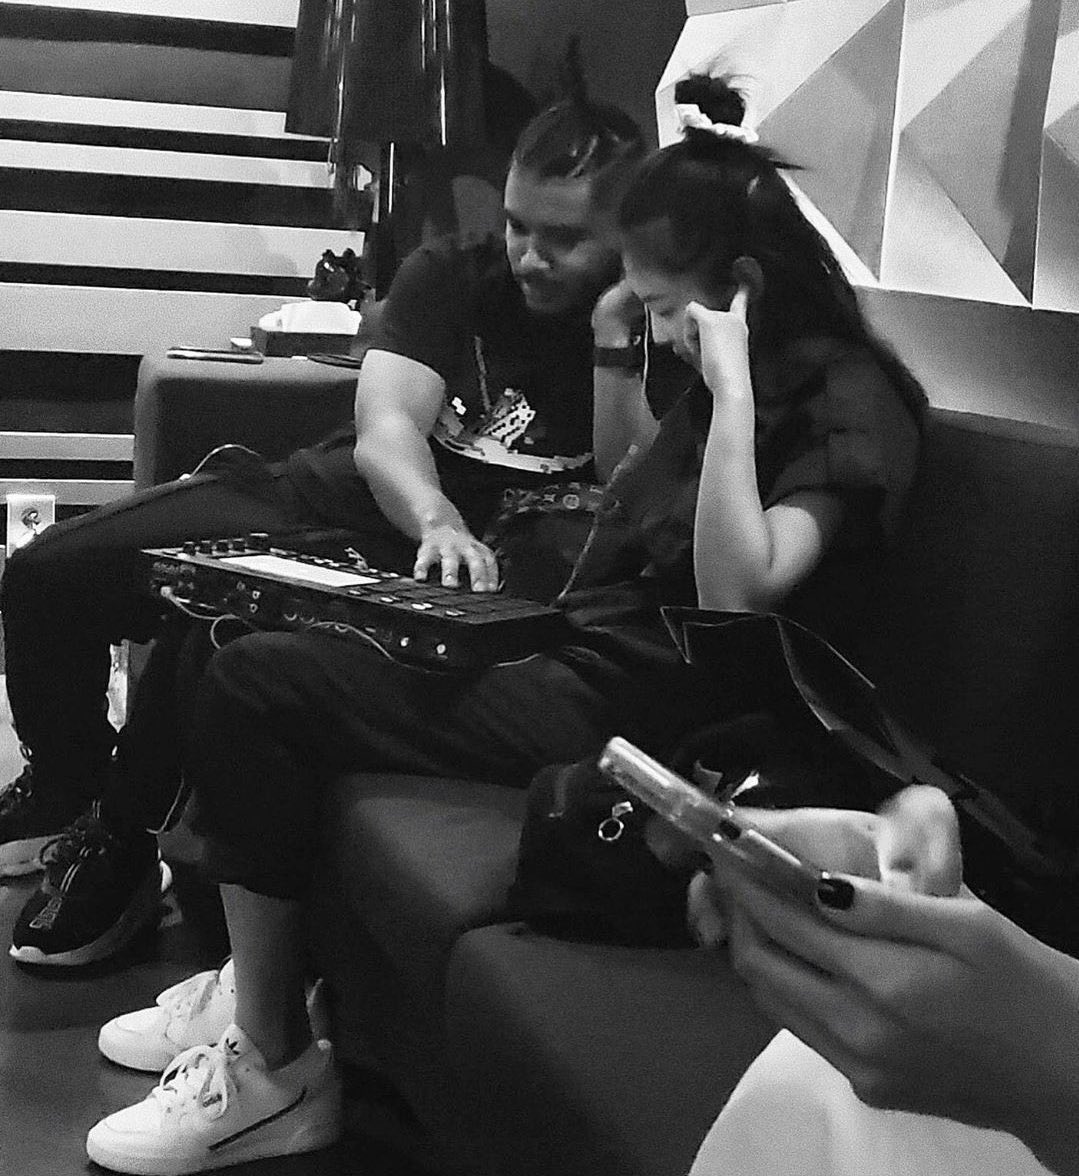 Here is a video of Tommy Brown saying how he fell asleep in the studio while working with  @BLACKPINK and after waking up 8 HOURS later, they were still working, non stop!Here are some pictures of Jennie and Lisa "making beats" and working on music